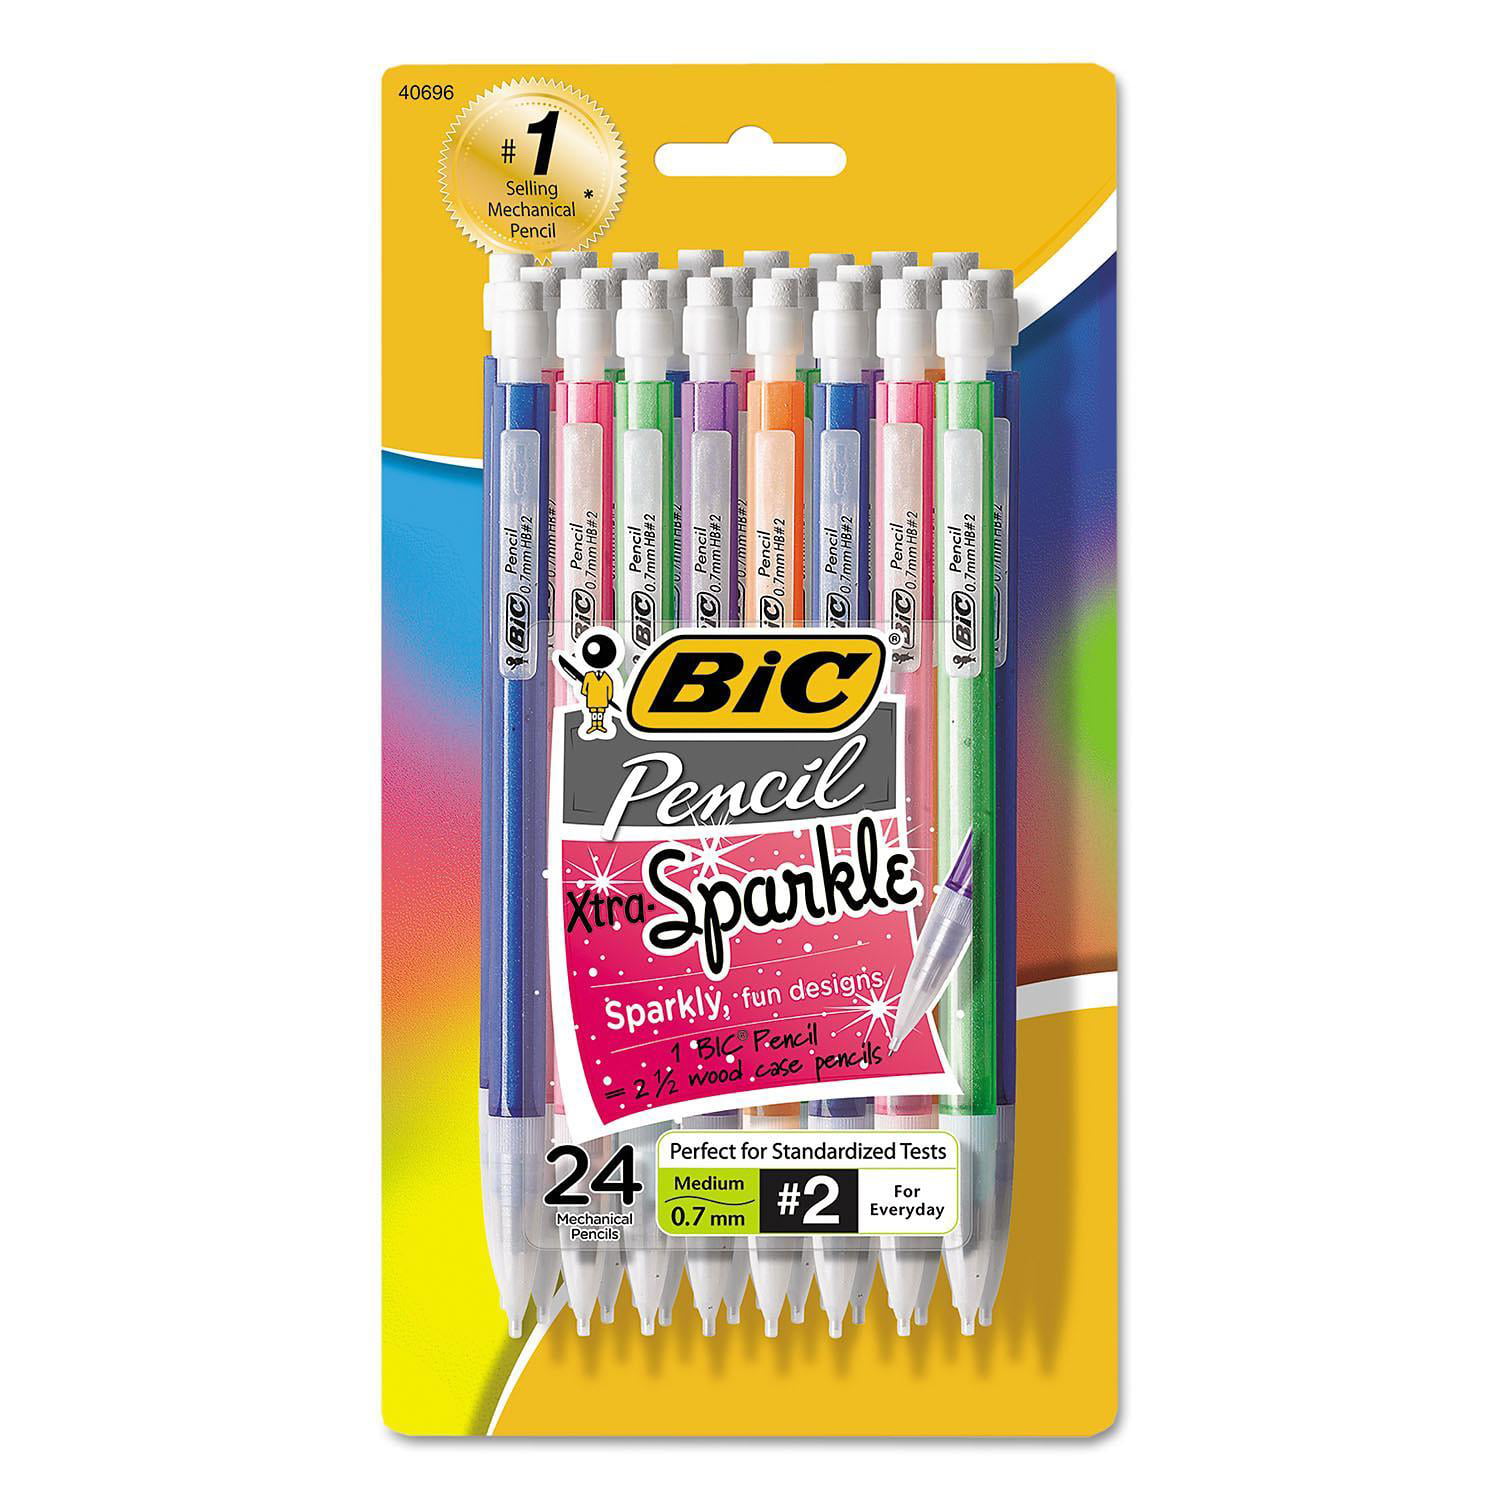 0.7 mm Blue, Green, Orange, Purple, Red Refillable Design for Long-Lasting Use.1 Pack Medium Point Xtra-Sparkle Mechanical Pencil 24-Count